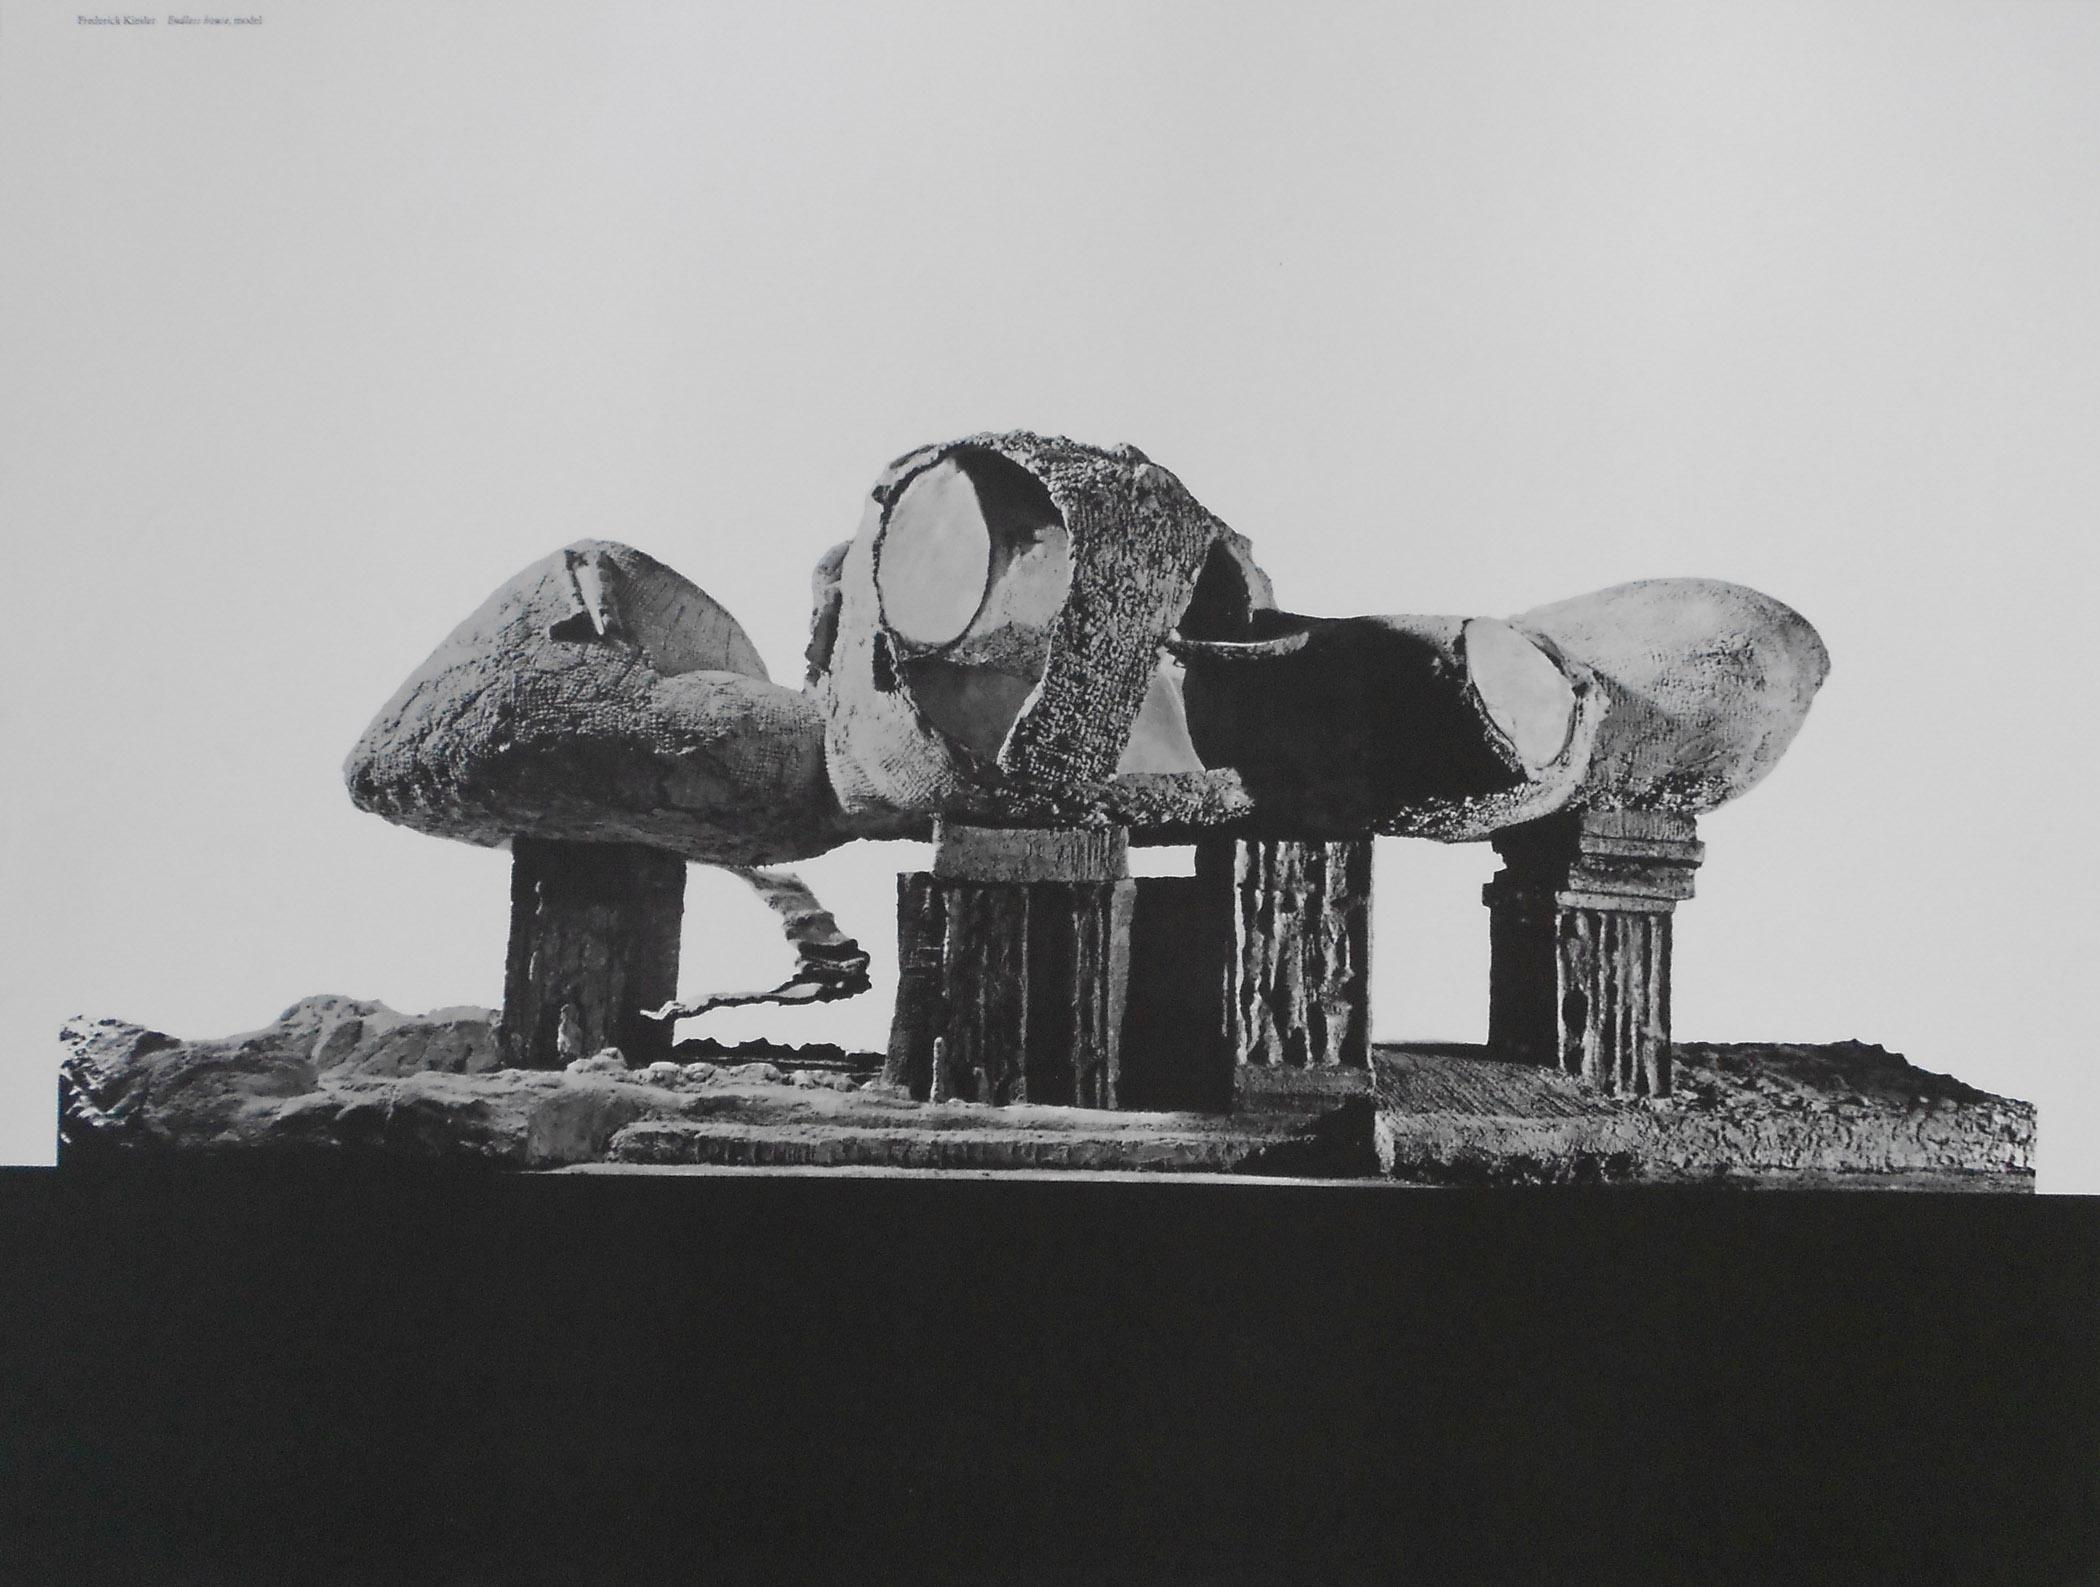 "Frederick Kiesler: An Exhibition of Architecture and Sculpture"